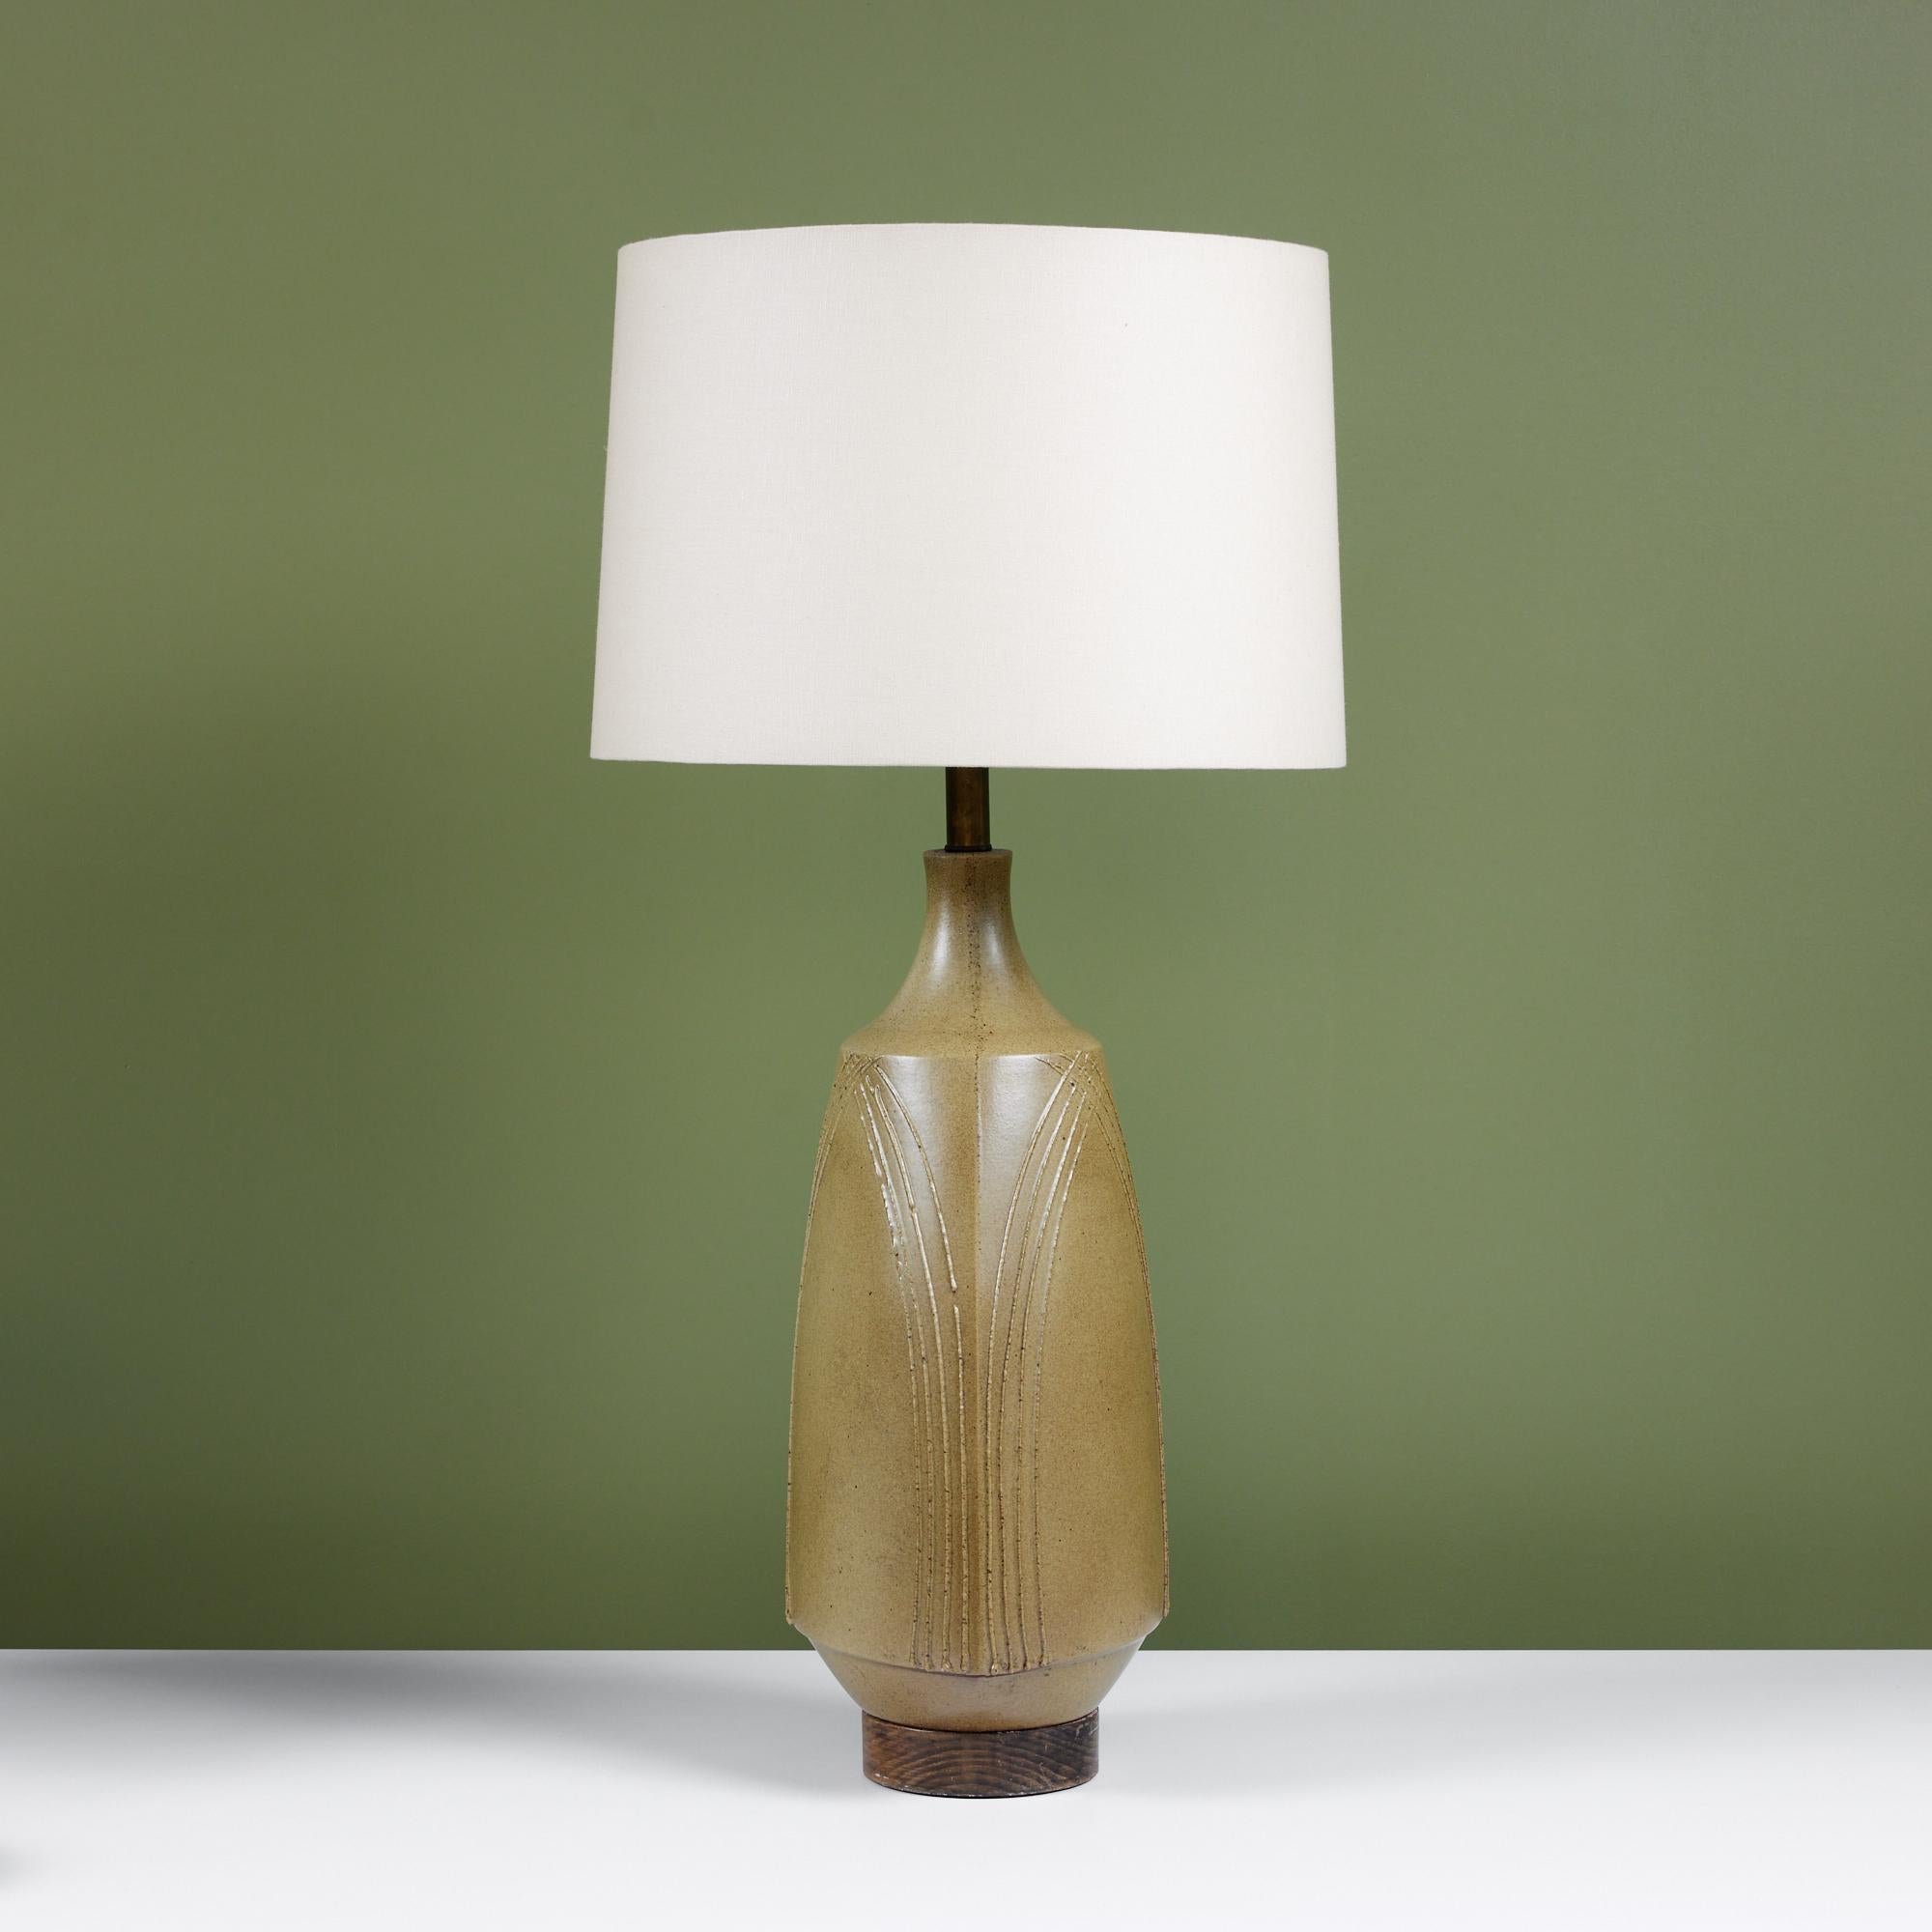 David Cressey stoneware lamp, c.1960s, USA. The wheel thrown stoneware lamp features an olive green speckled glaze with applied textured lines that intersect at the top of the lamp creating a triangular arch detail. The ceramic form sits atop a